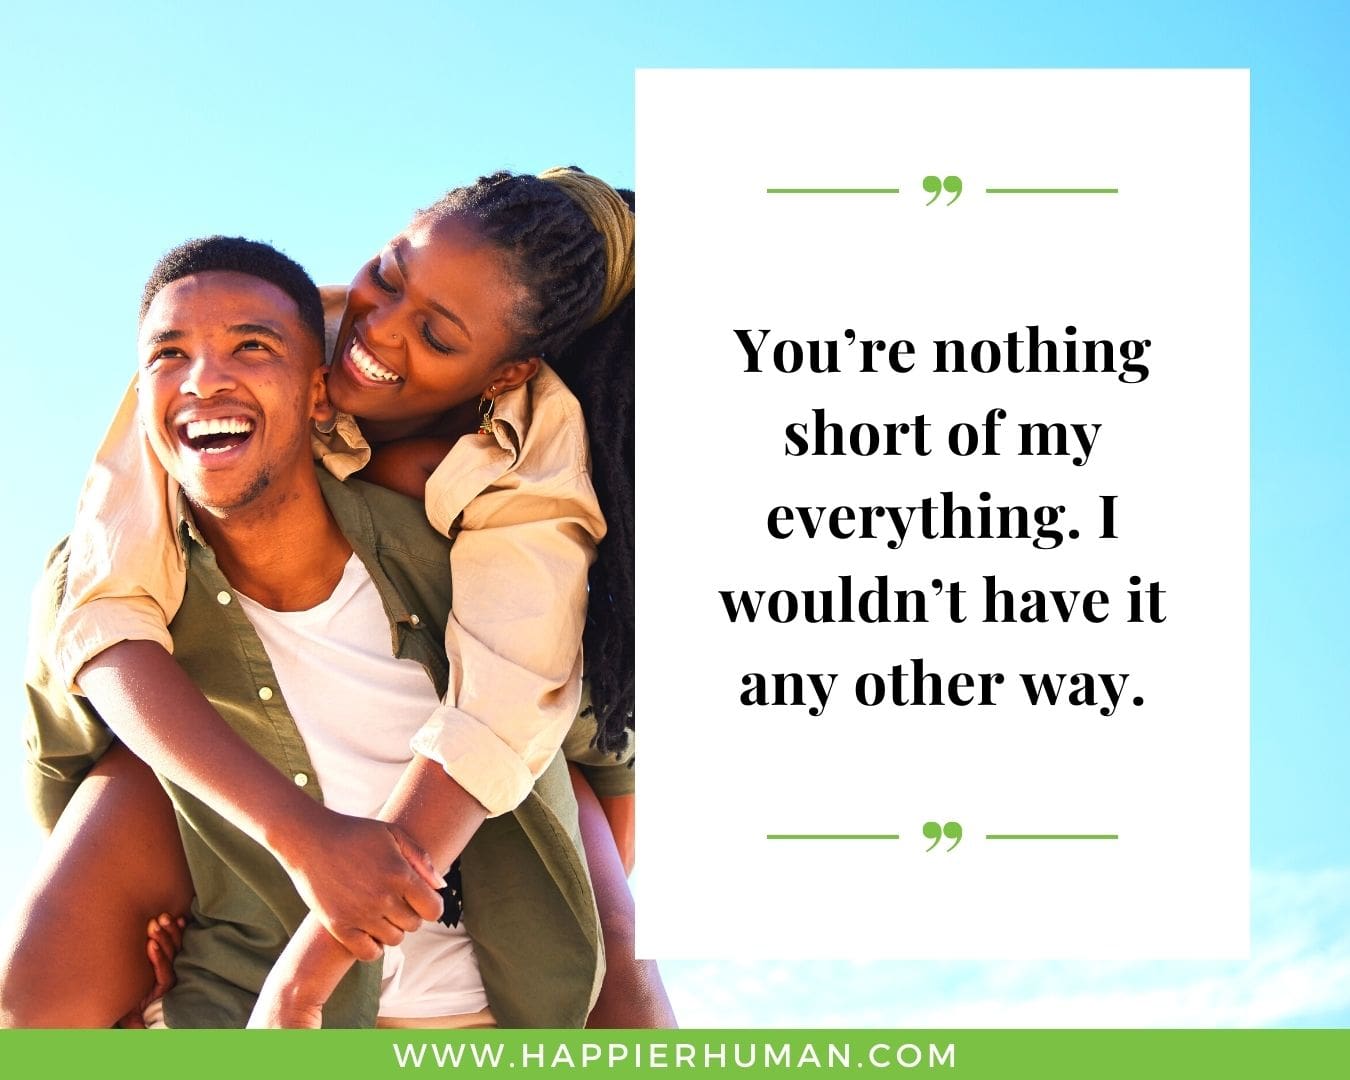 Unconditional Love Quotes for Her - “You’re nothing short of my everything. I wouldn’t have it any other way.”